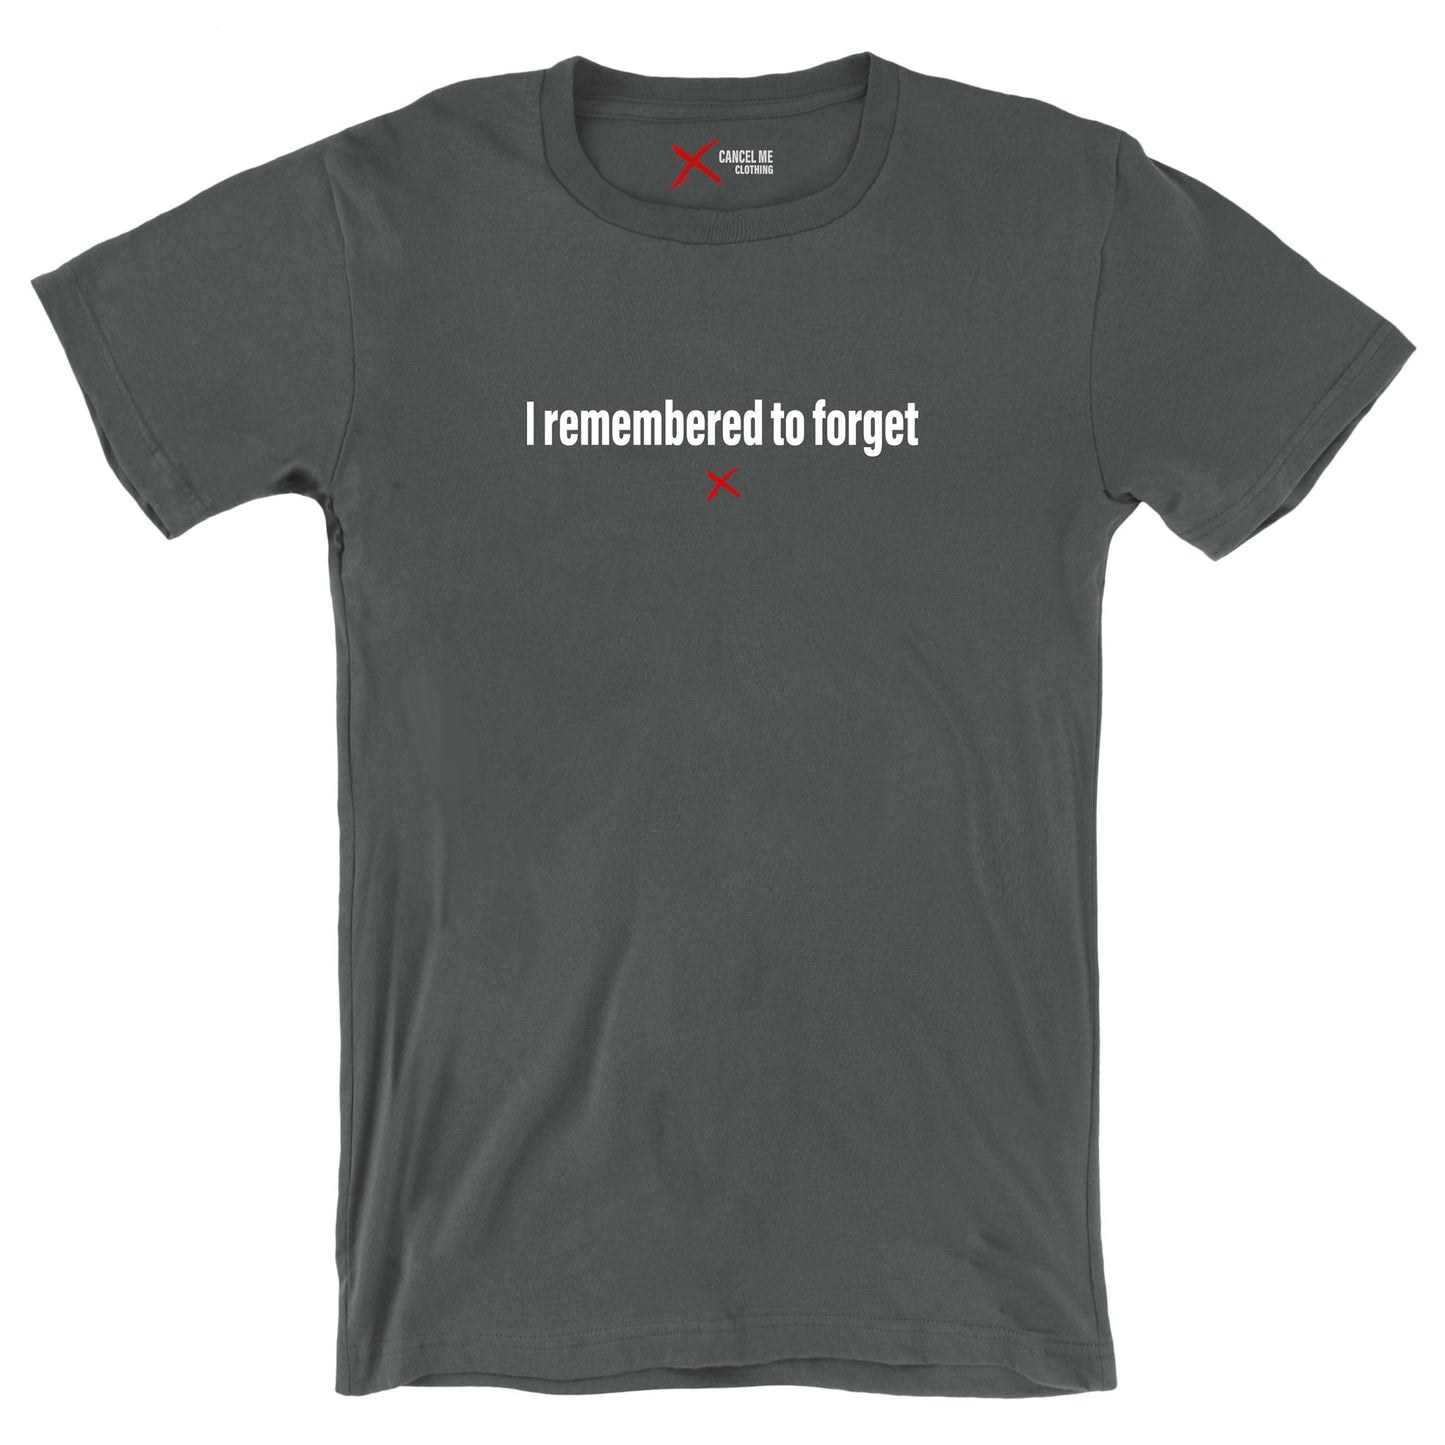 I remembered to forget - Shirt